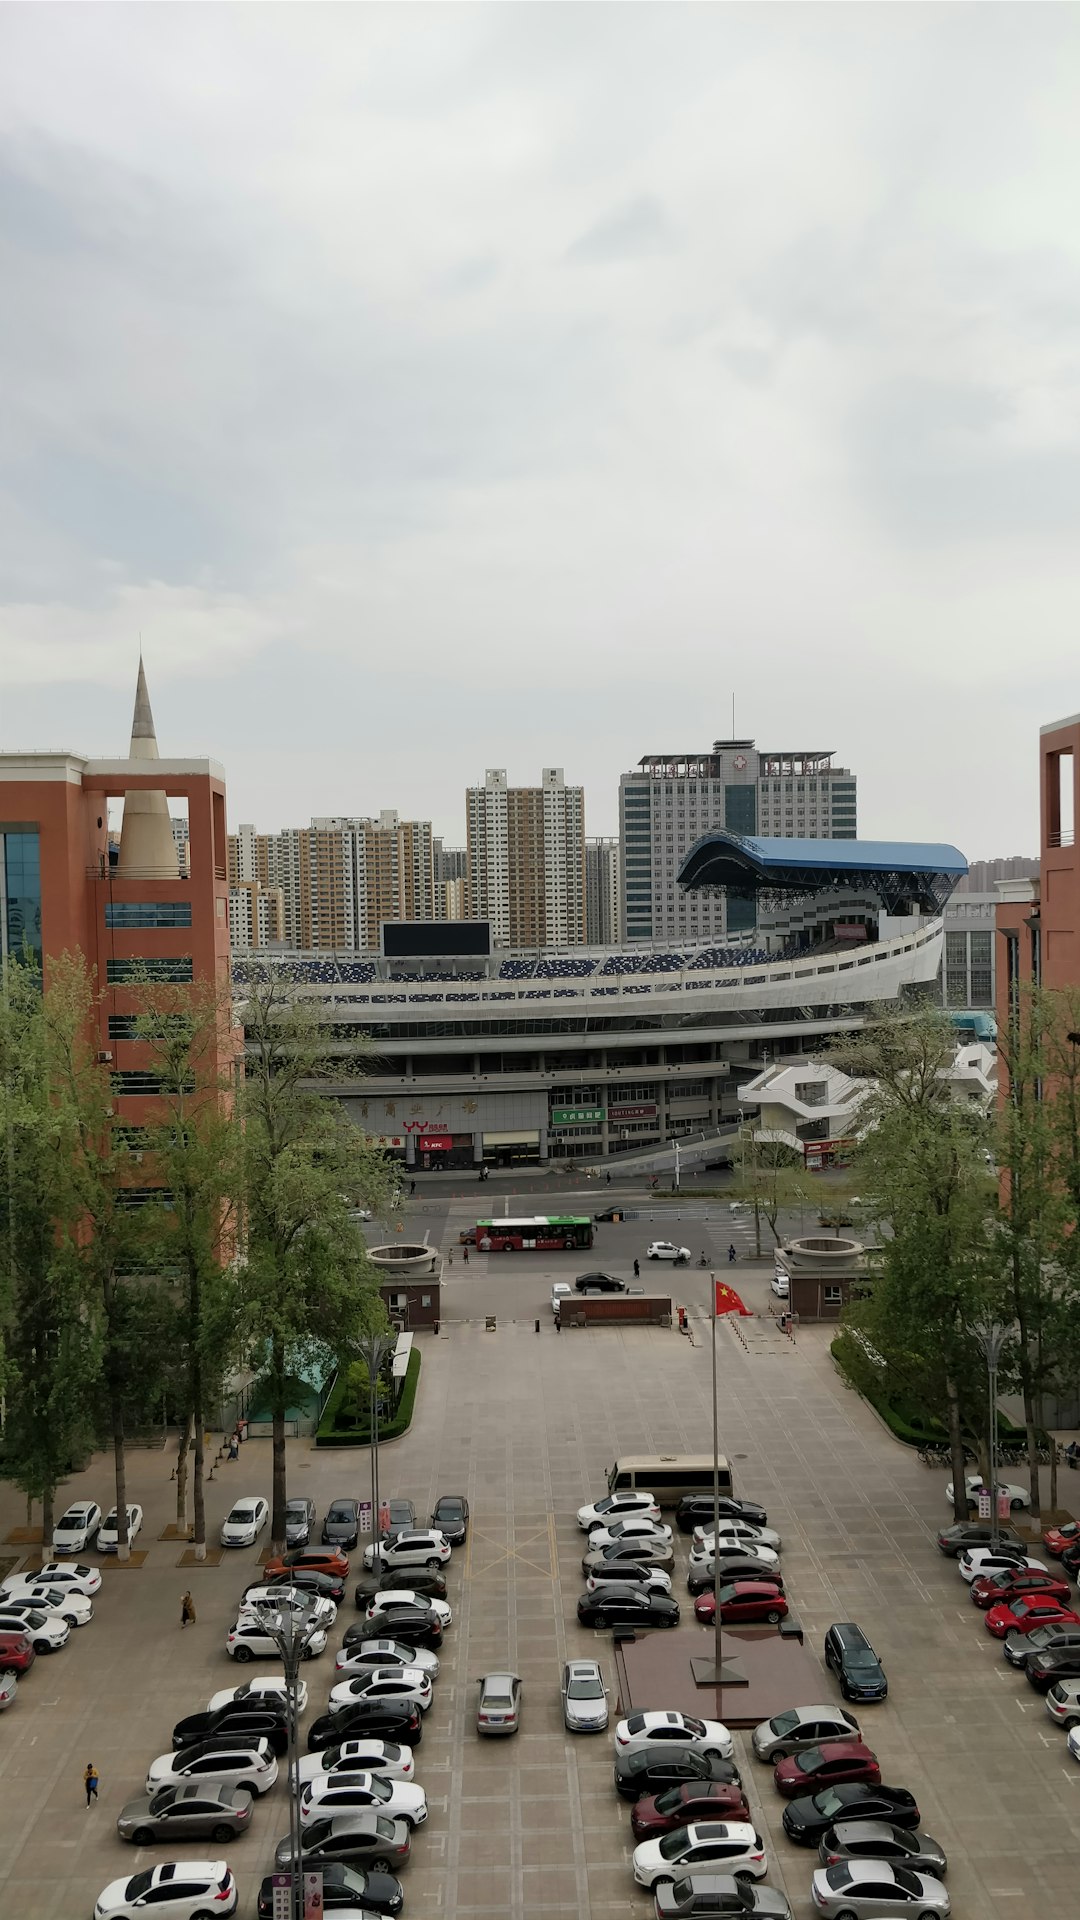 travelers stories about Town in Hebei Medical University, China